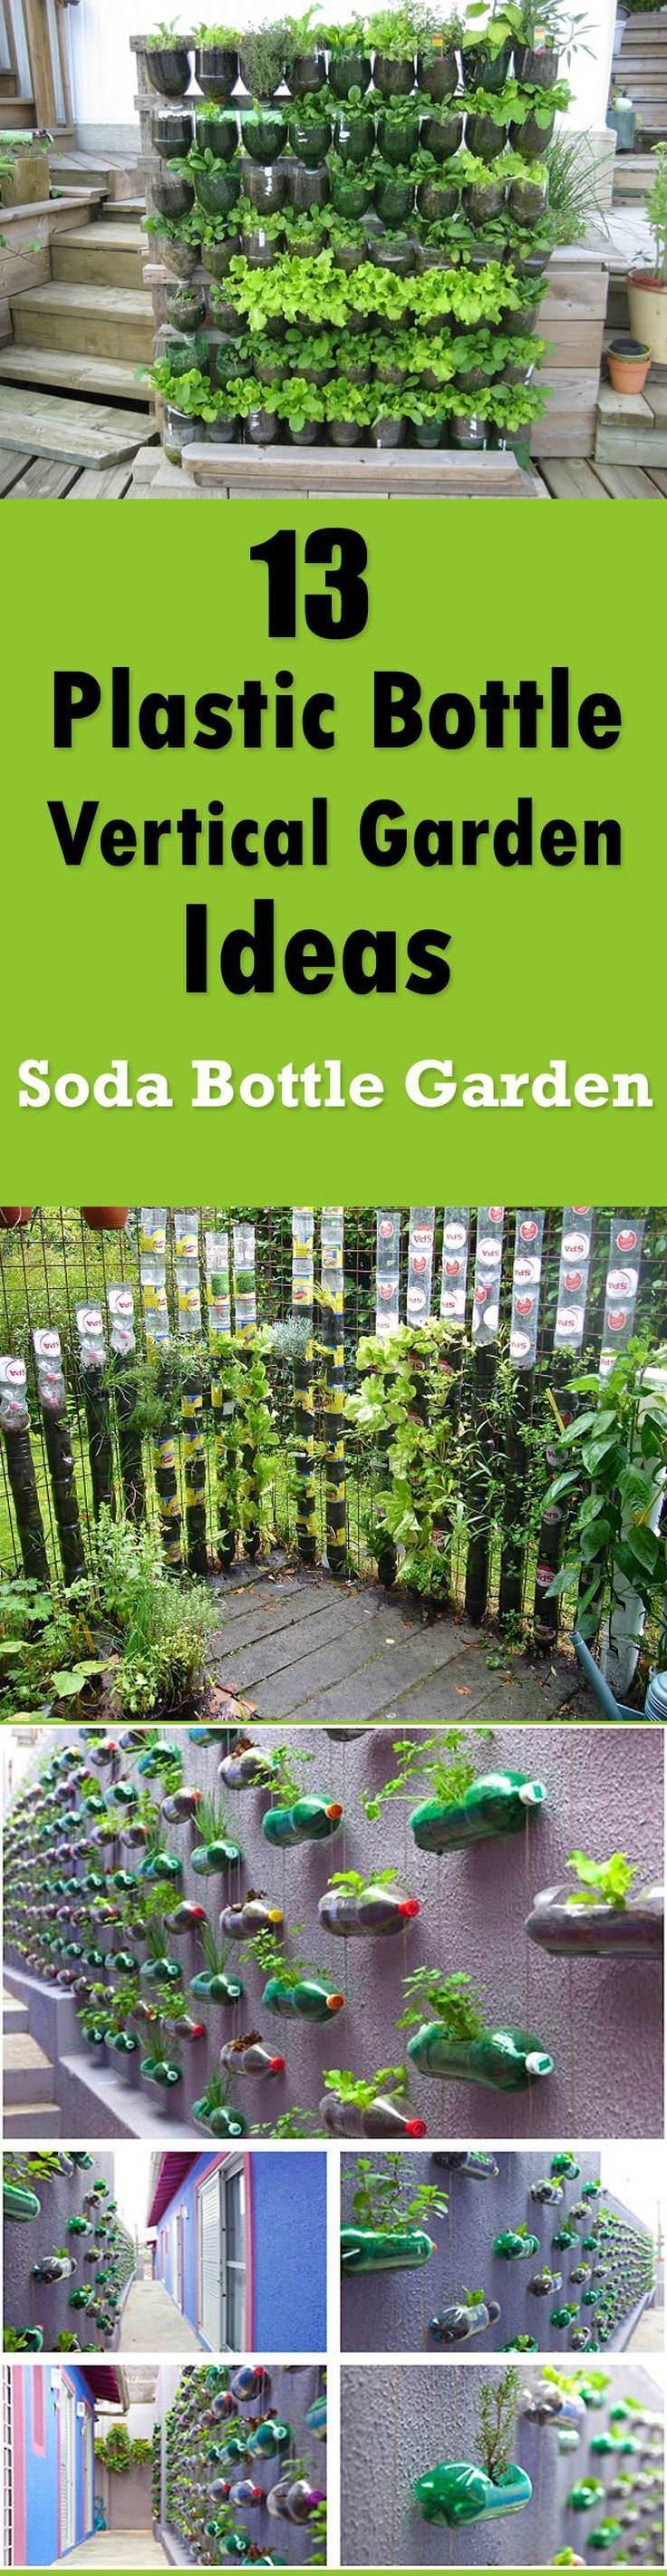 These 13 plastic bottle vertical garden ideas will interest you if you are a creative person, DIY lover and love to grow plants.